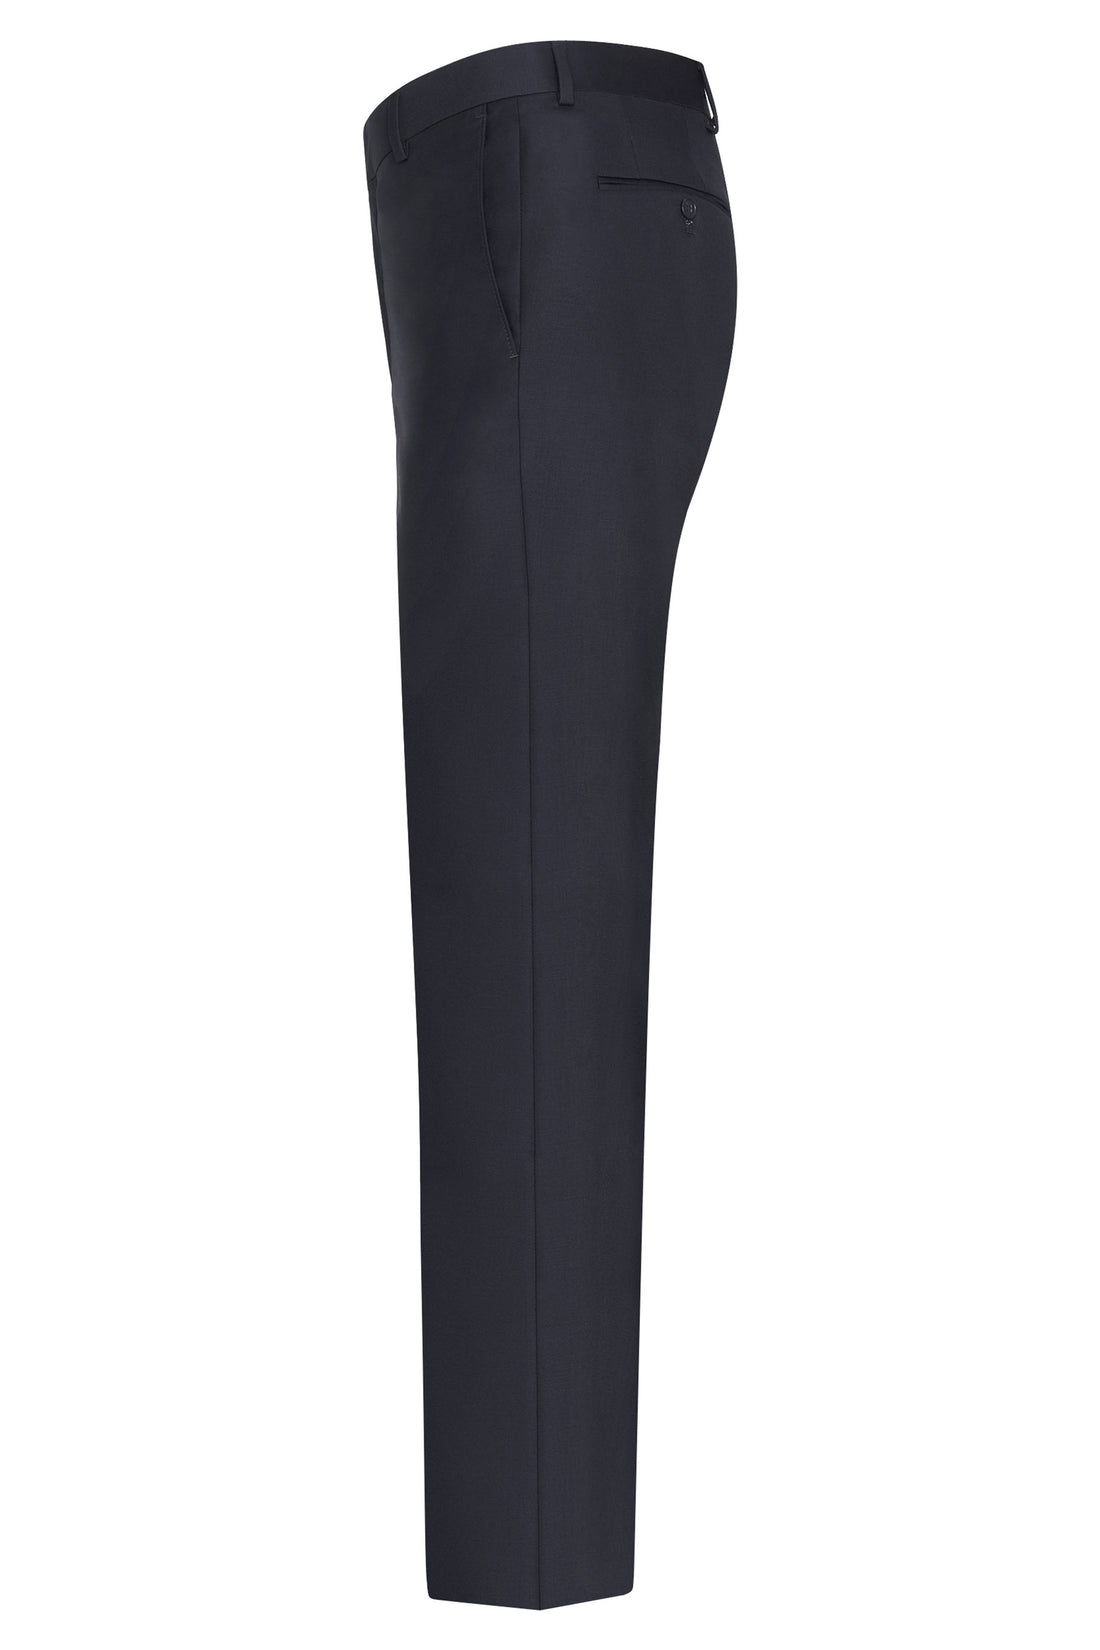 Navy Flat Front Trousers - Classic Fit